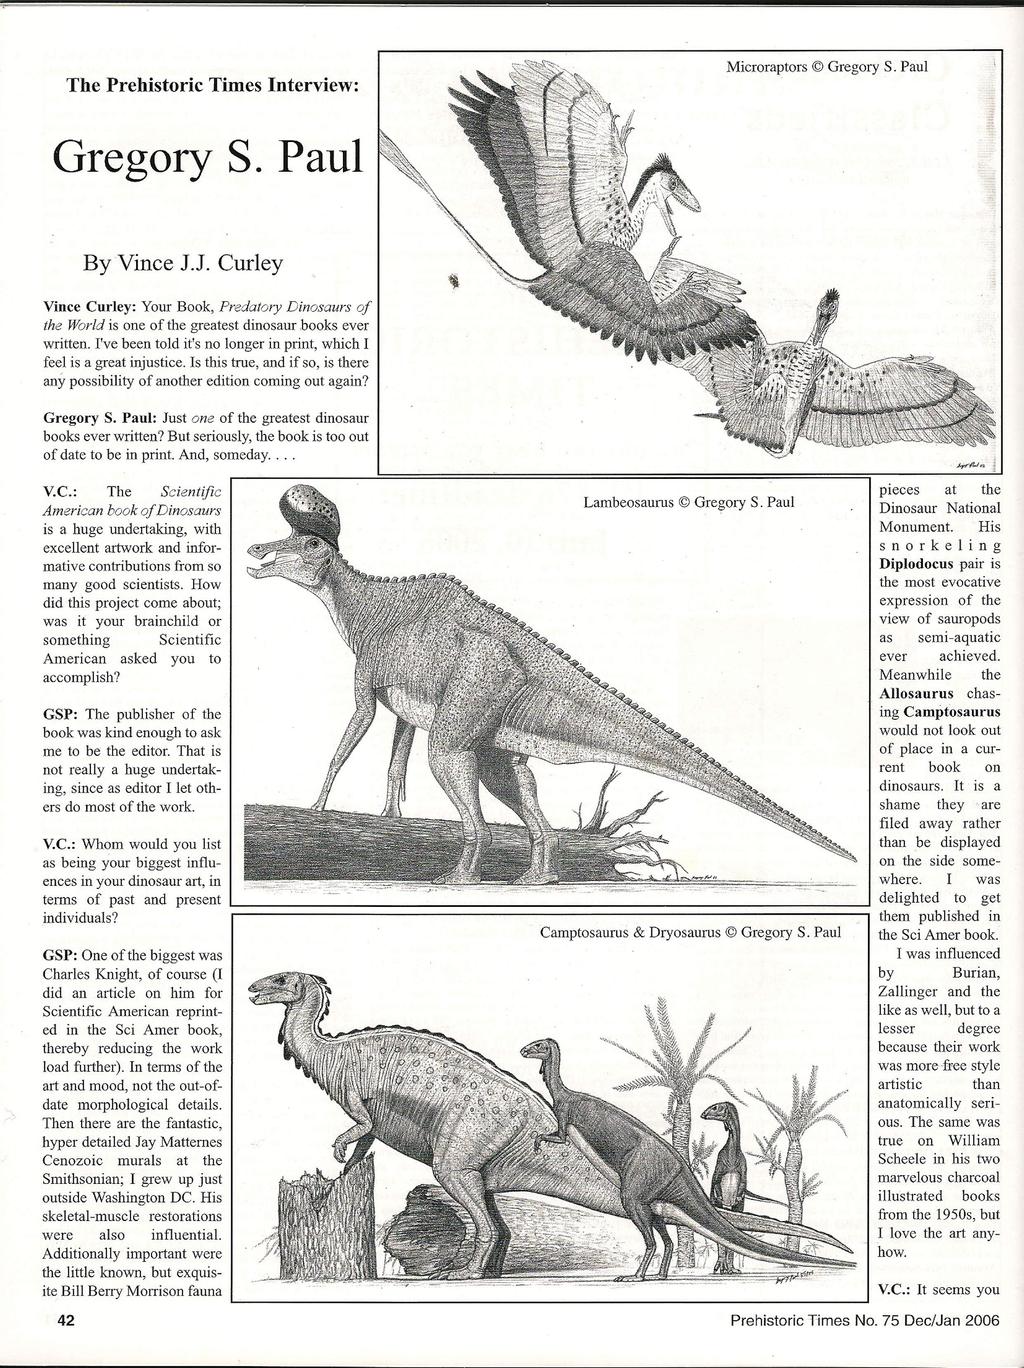 Microraptors The Prehistoric Times Interview: Gregory S. Paul ByVince 1.J. Curley Vince Curley: Your Book, Predatory Dinosaurs of the World is one of the greatest dinosaur hooks ever written.